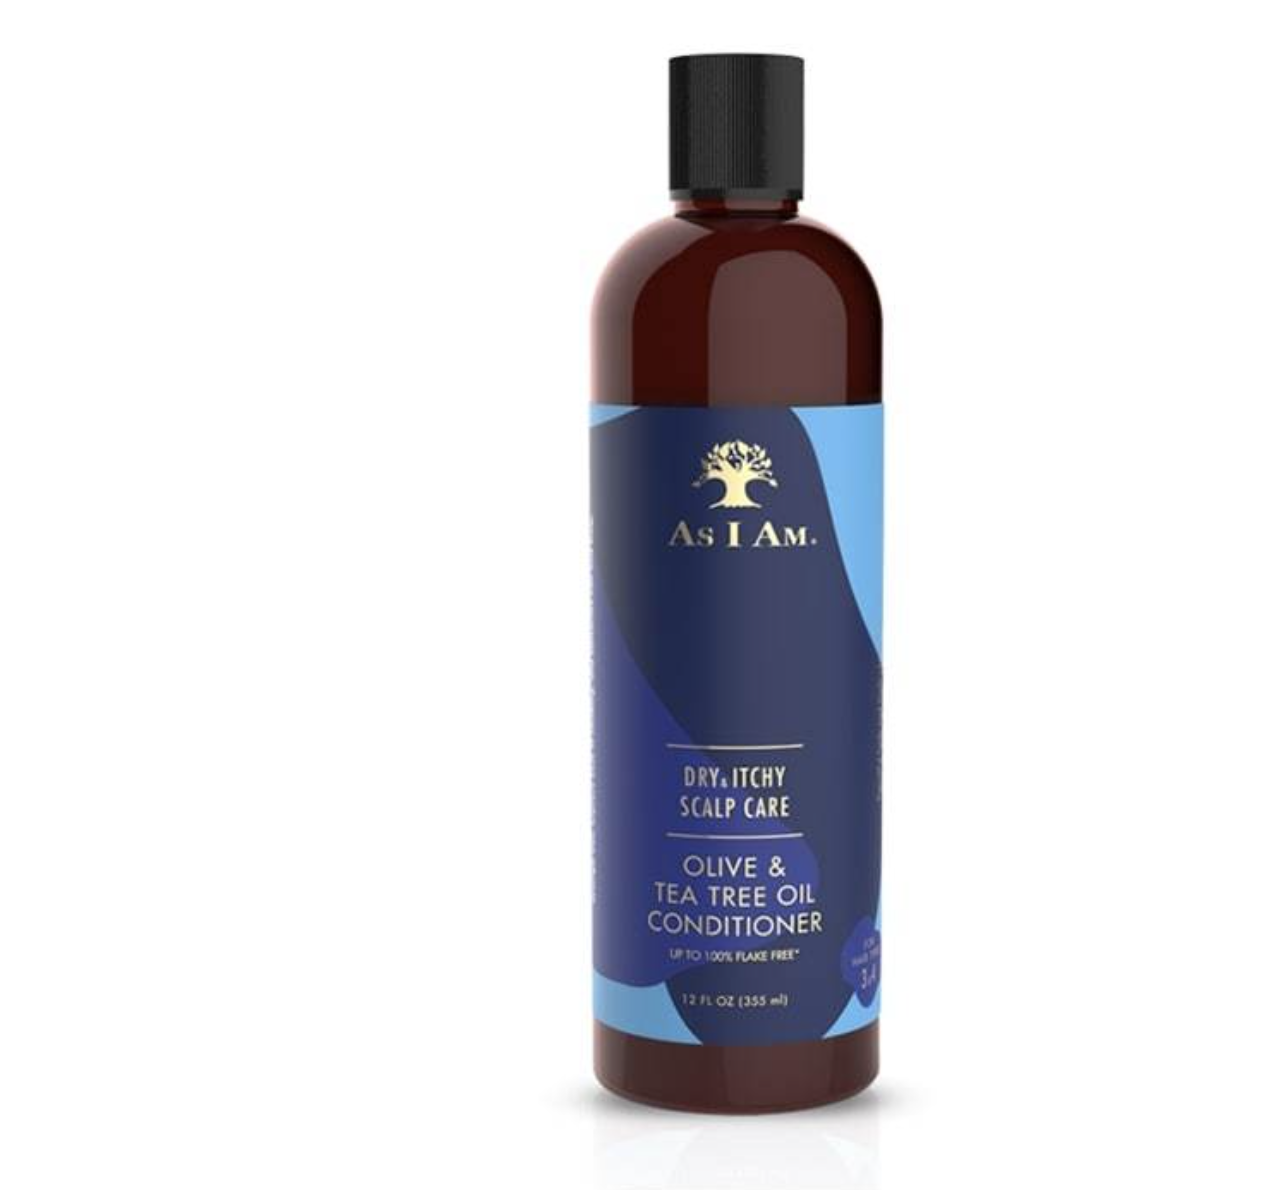 As I Am Scalp Care Conditioner 12 oz - BPolished Beauty Supply